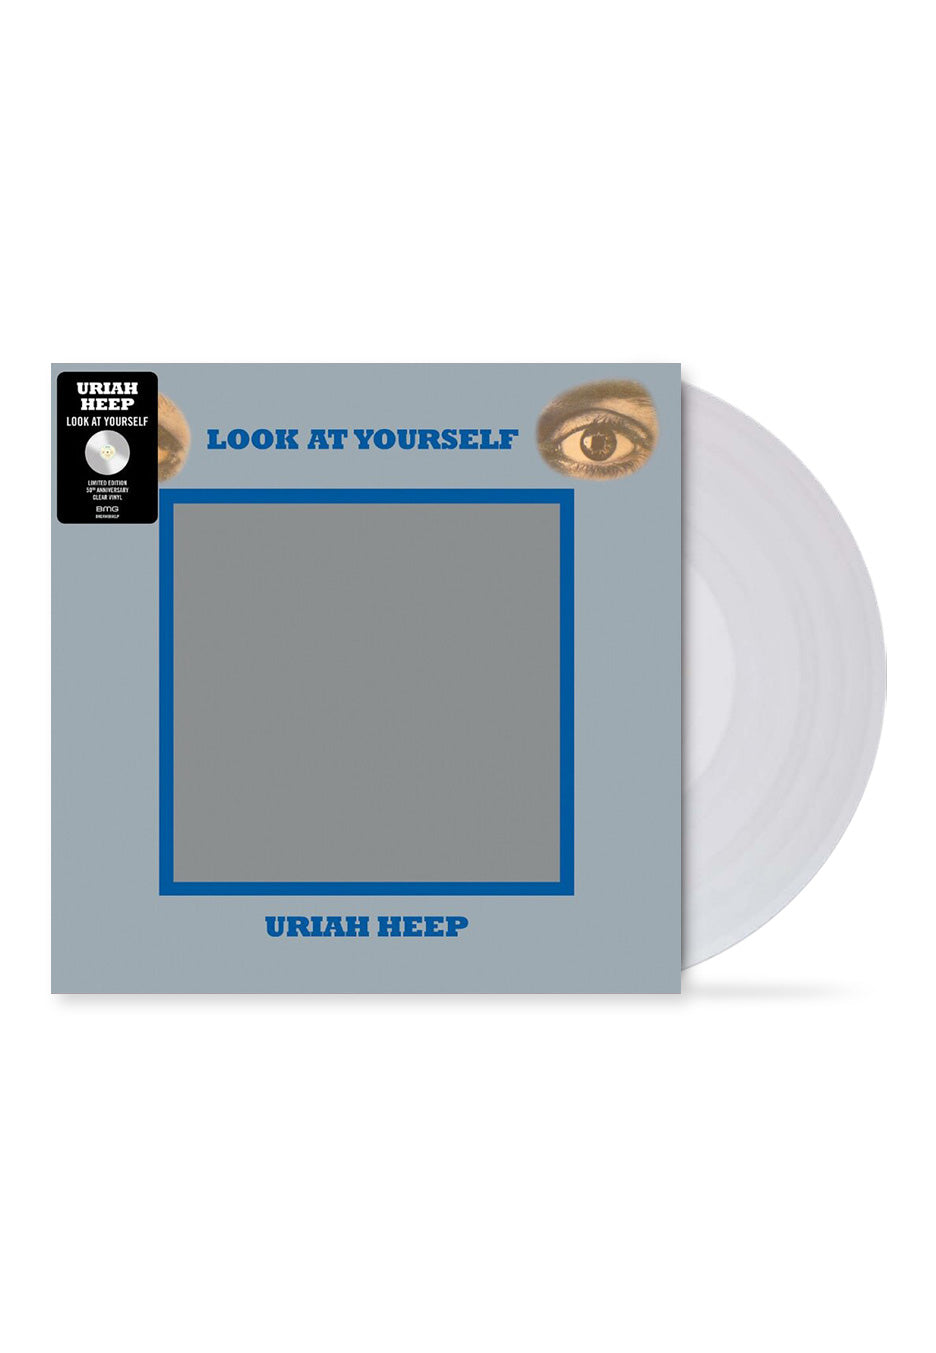 Uriah Heep - Look At Yourself (50th Anniversary) Ltd. Clear - Colored Vinyl